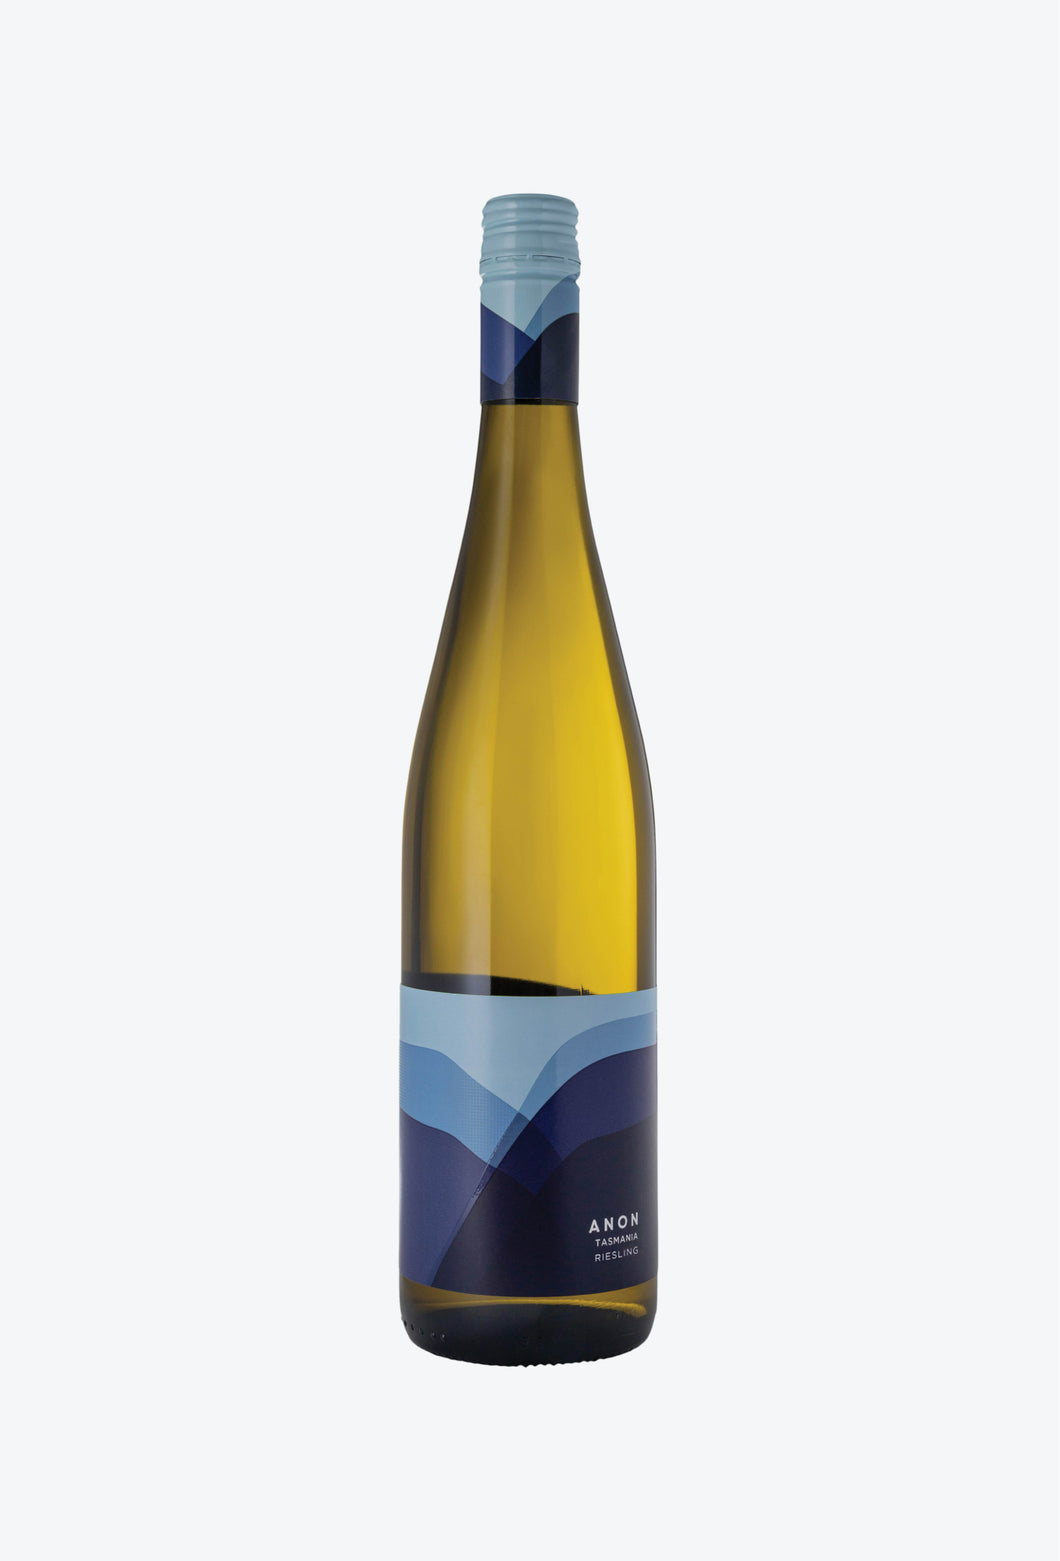 2018 Anon Riesling